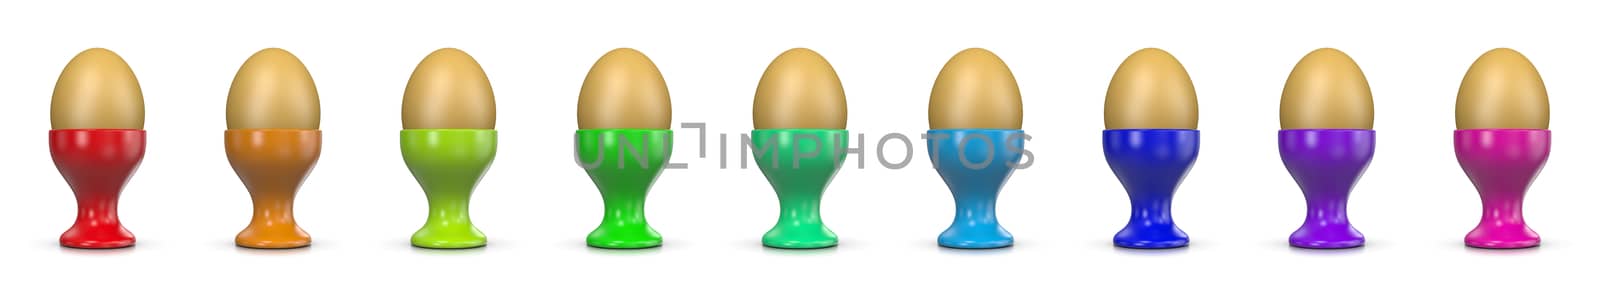 Egg Cup Series by make